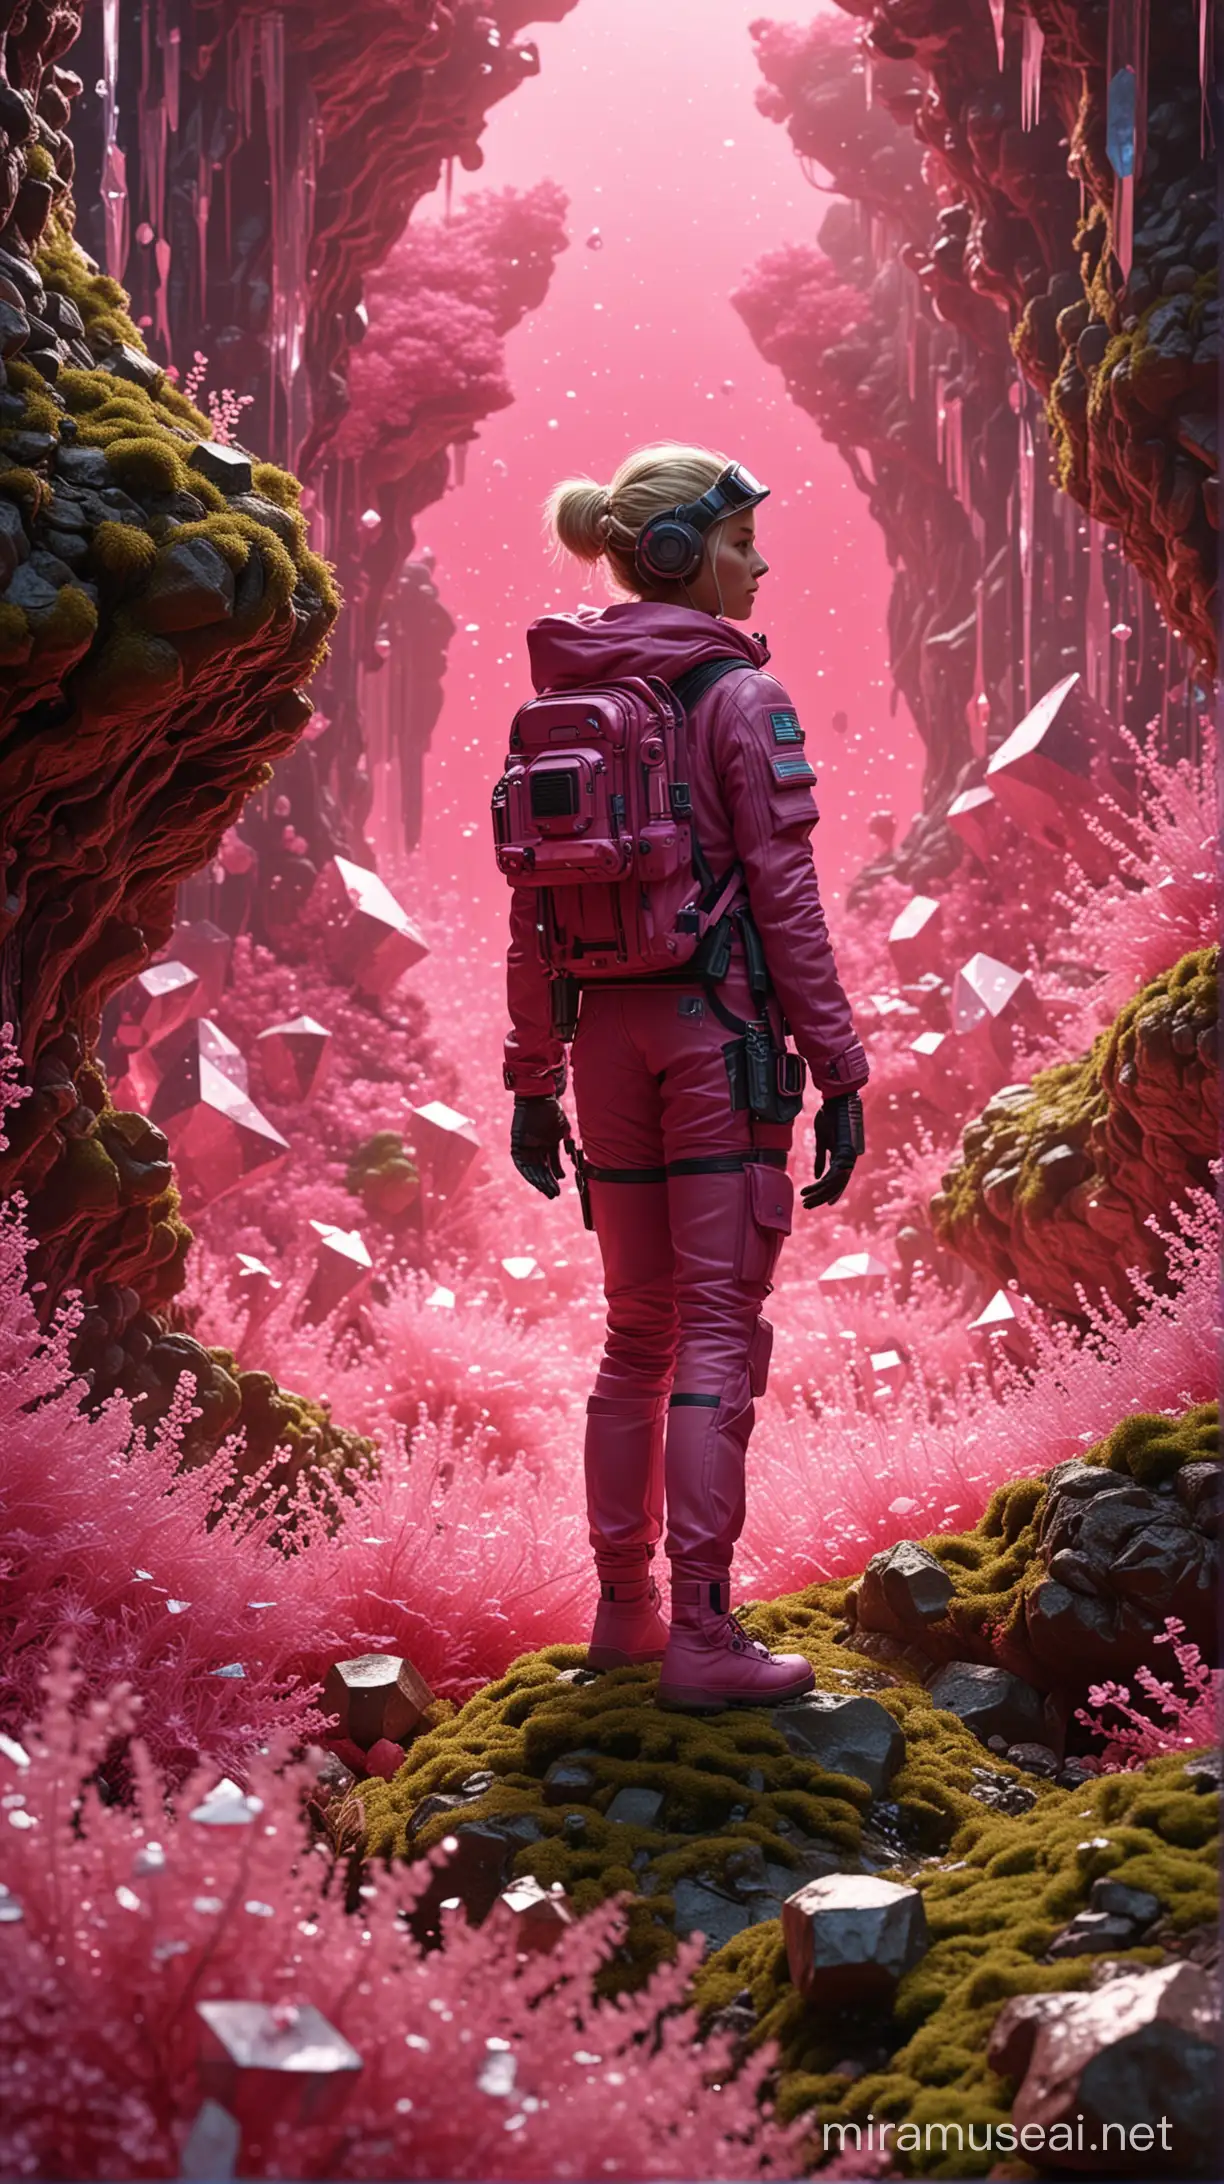 A futuristic explorer surrounded by pulsating pink crystals and luminous moss, in a hyper-realistic 3D portrayal